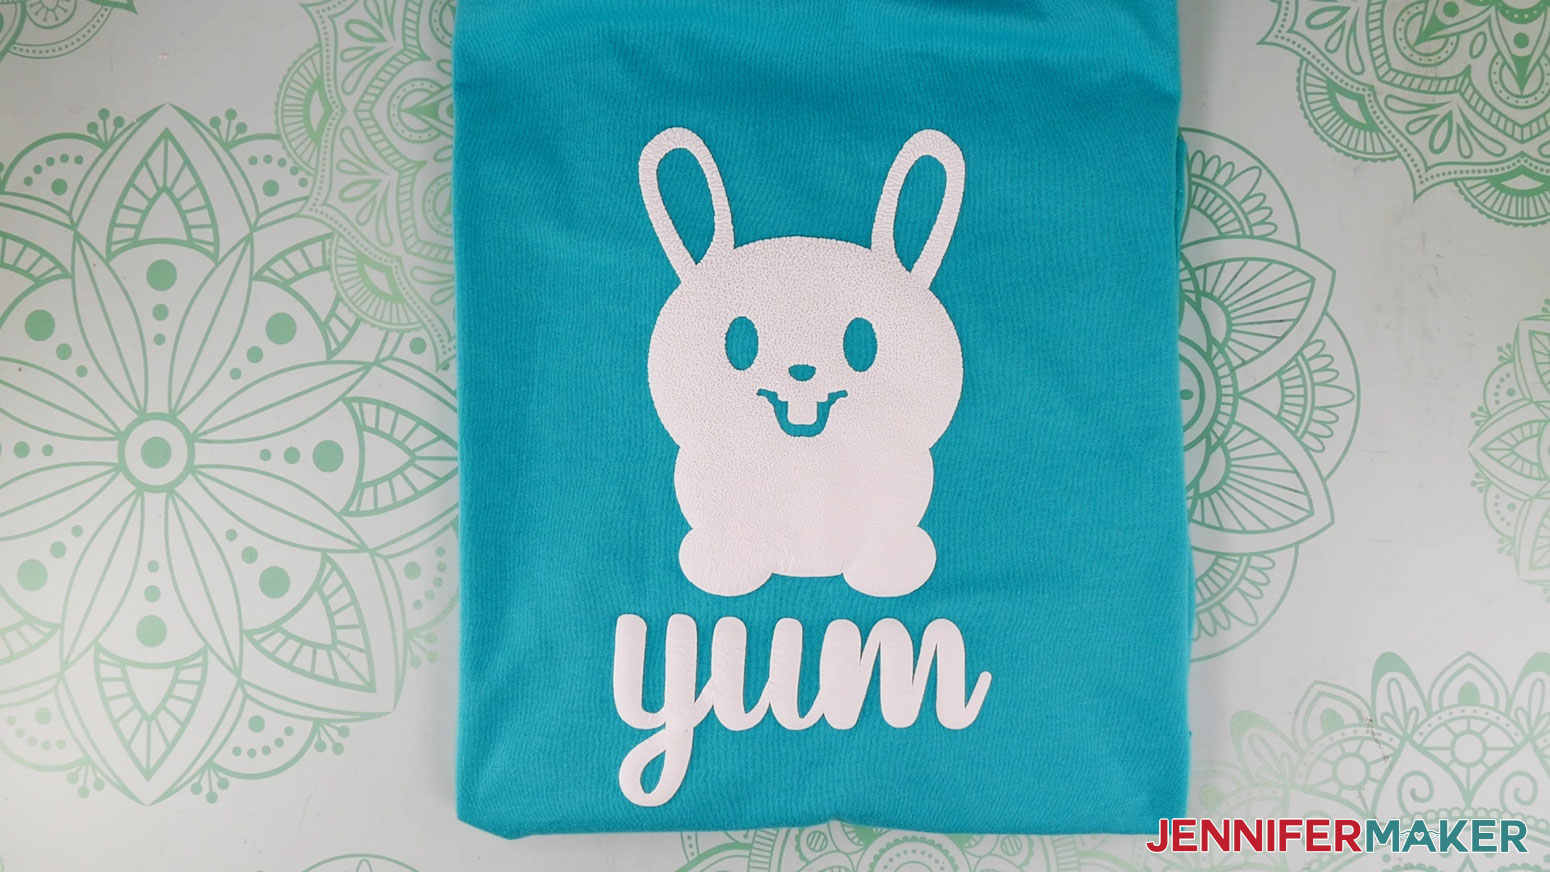 Learn how to use puff vinyl! Cute bunny puff design on a turquoise T-shirt.